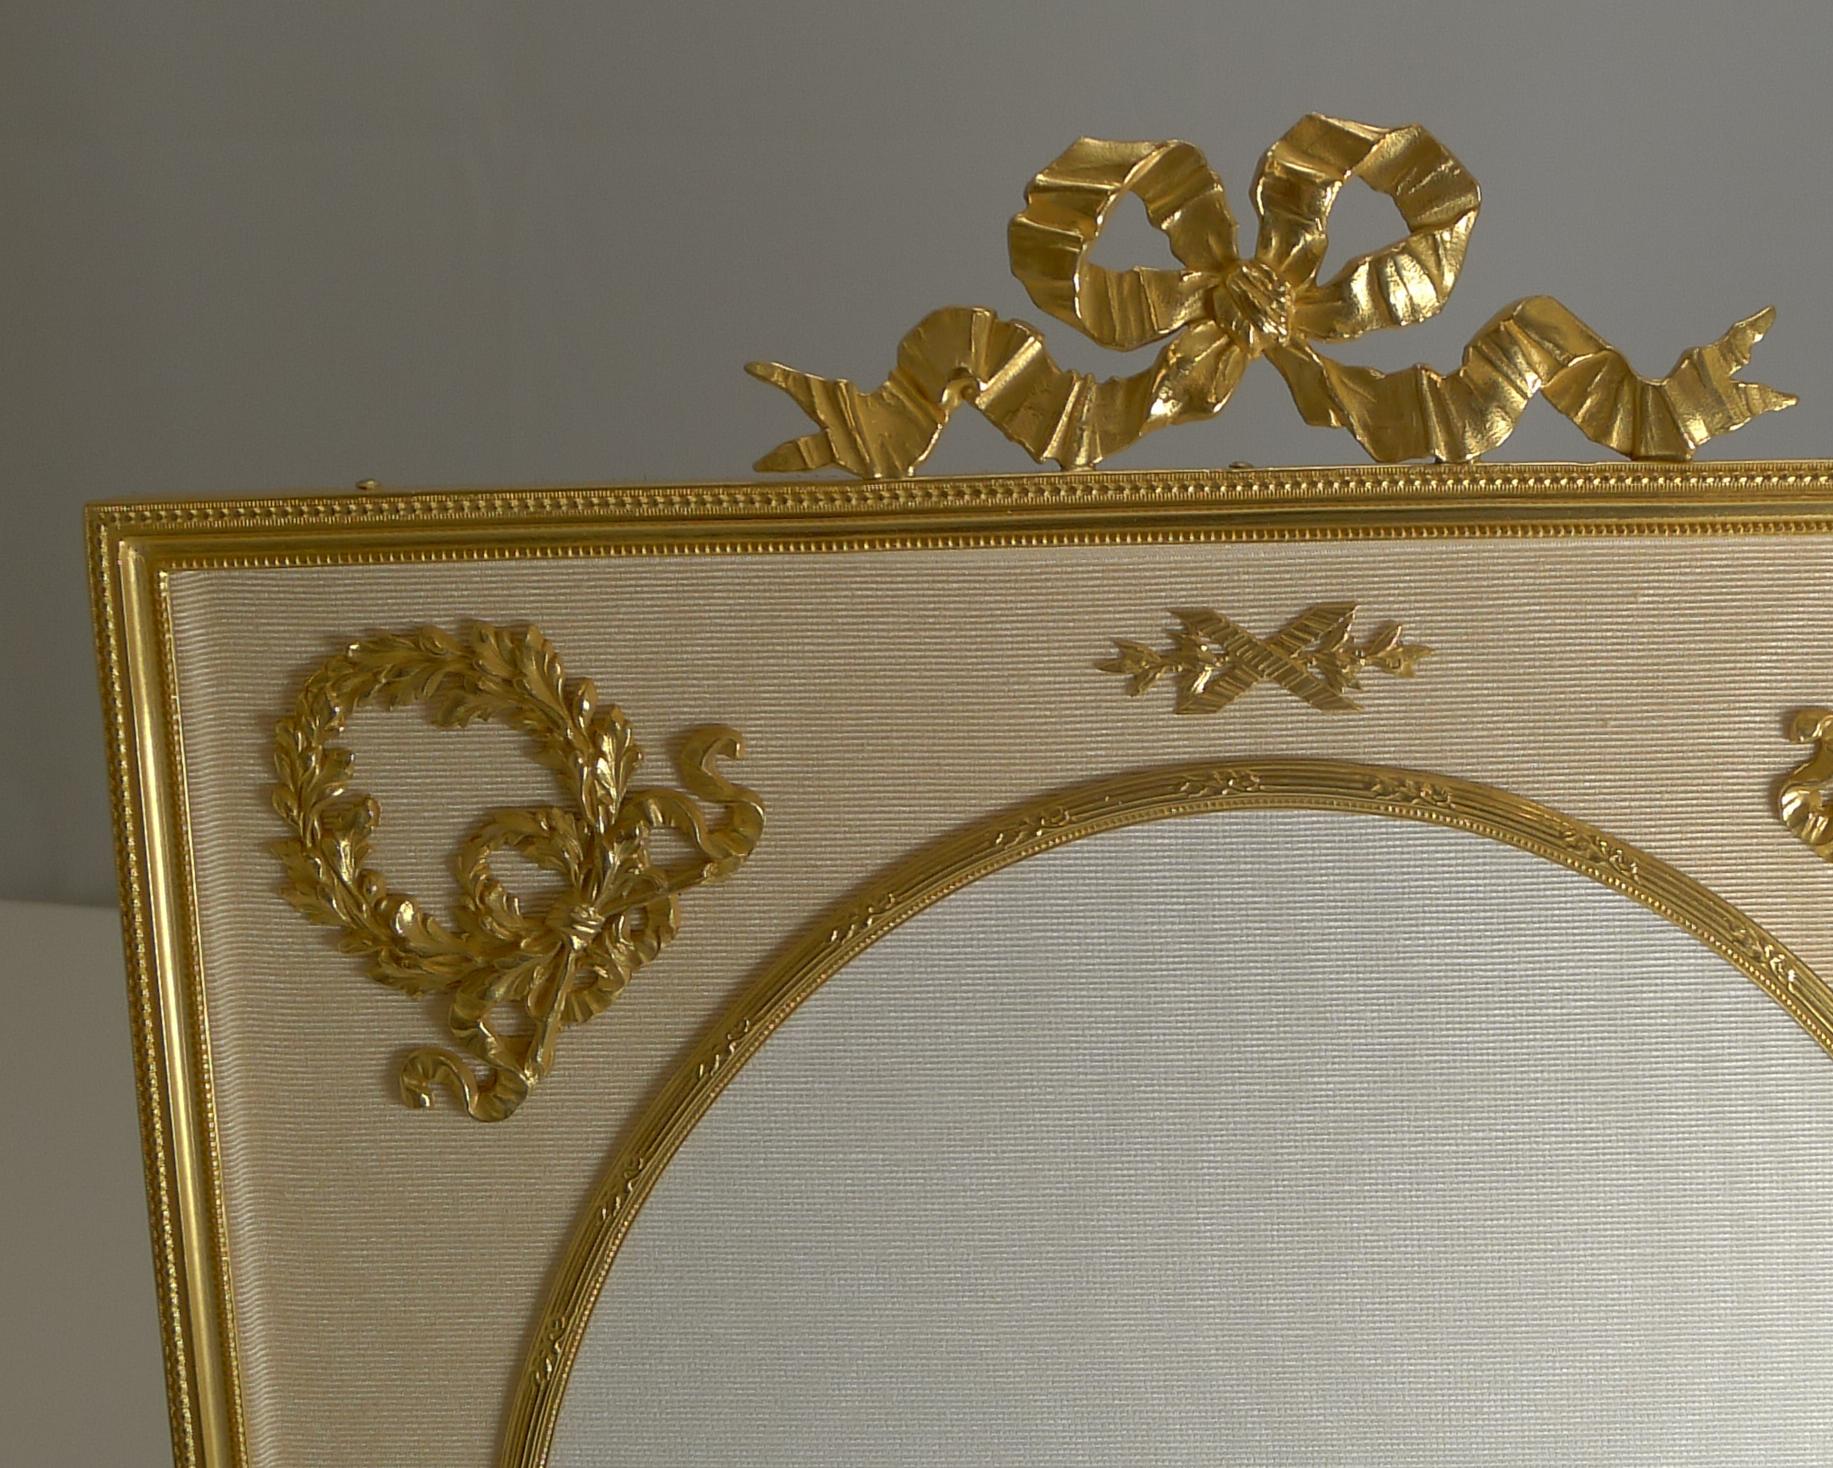 Edwardian Grand French Gilded Bronze Photograph / Picture Frame, circa 1900 For Sale